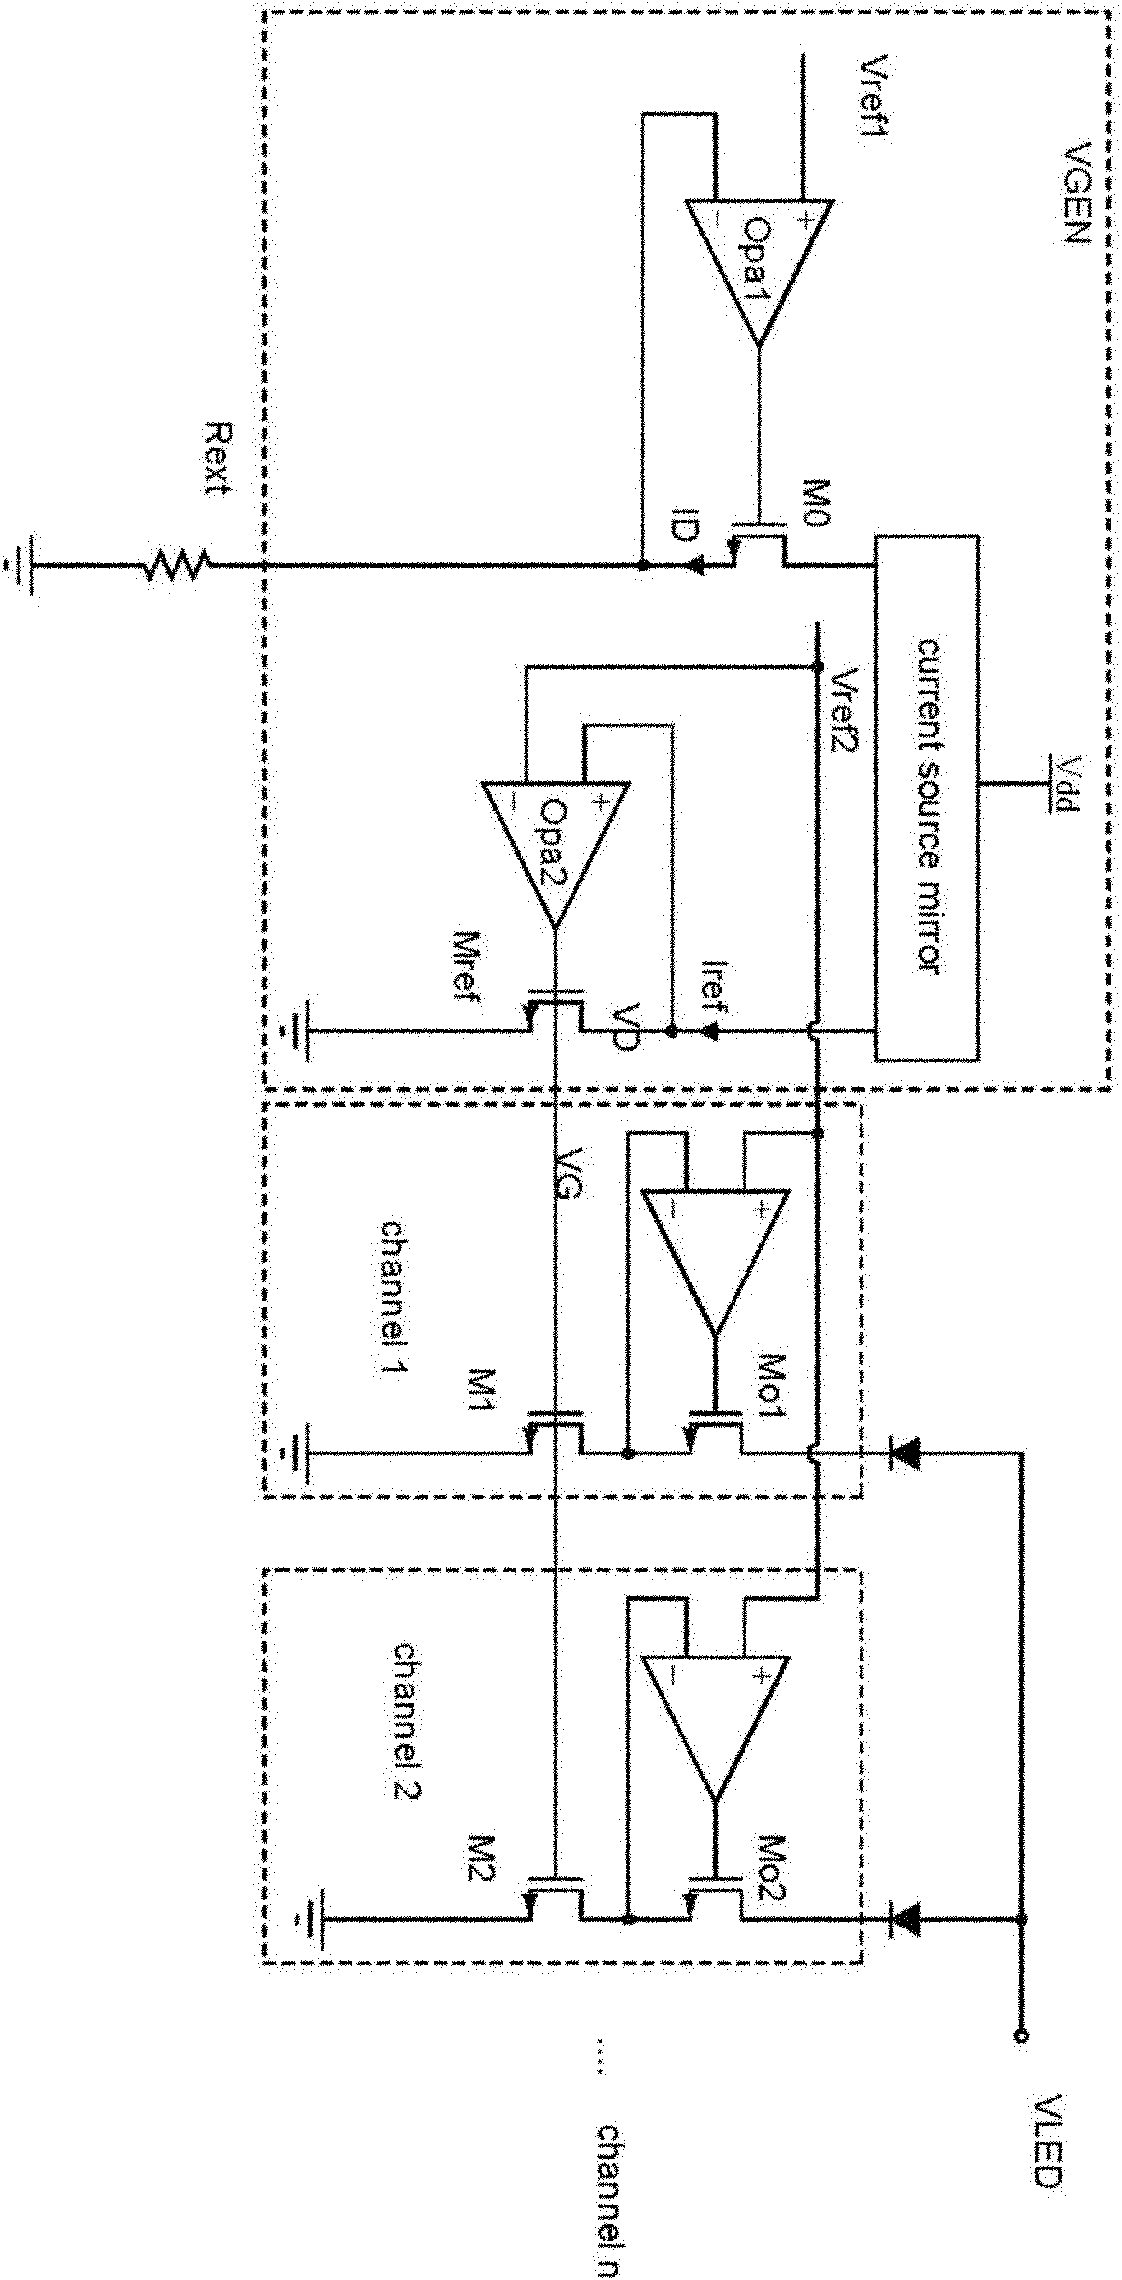 Small-area power tube-based low-mismatching multi-channel light-emitting diode (LED) constant current source driving circuit